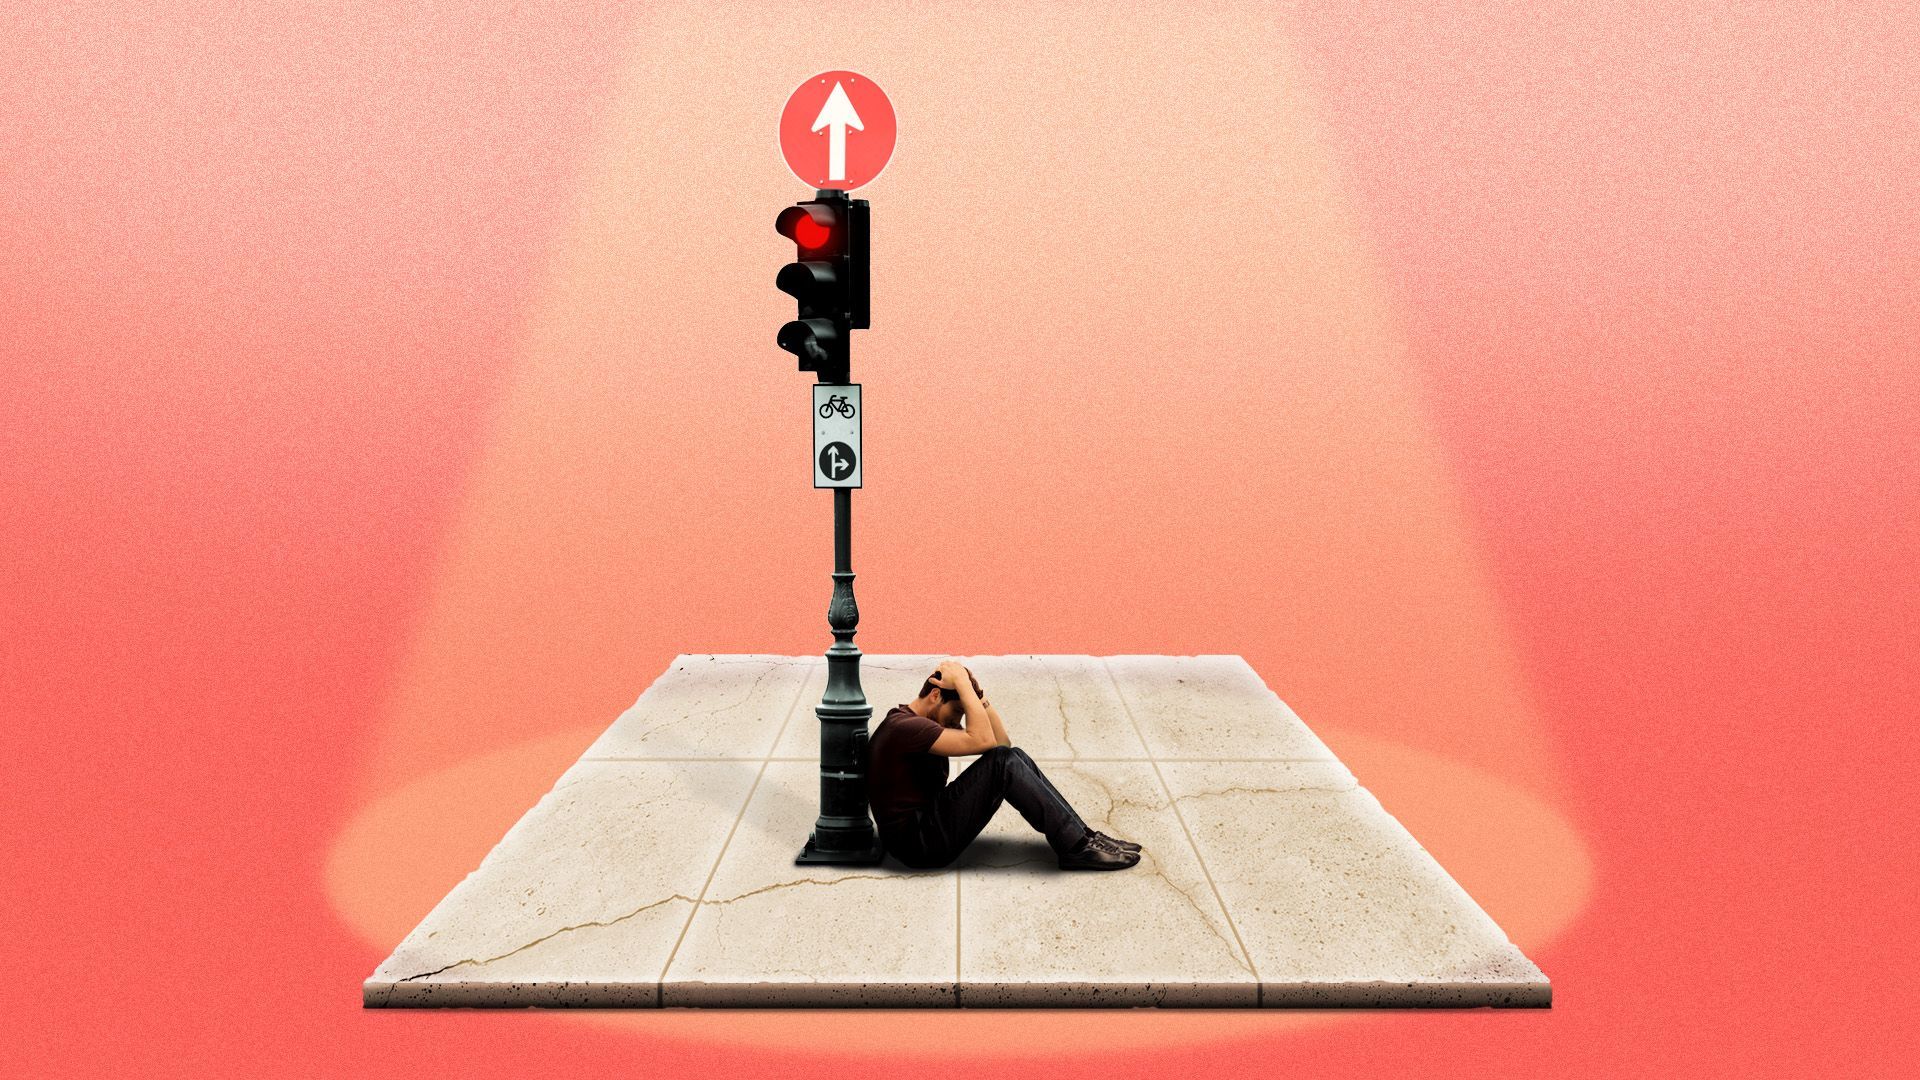 Illustration of a man leaning against a traffic post on a sidewalk with a light beaming down